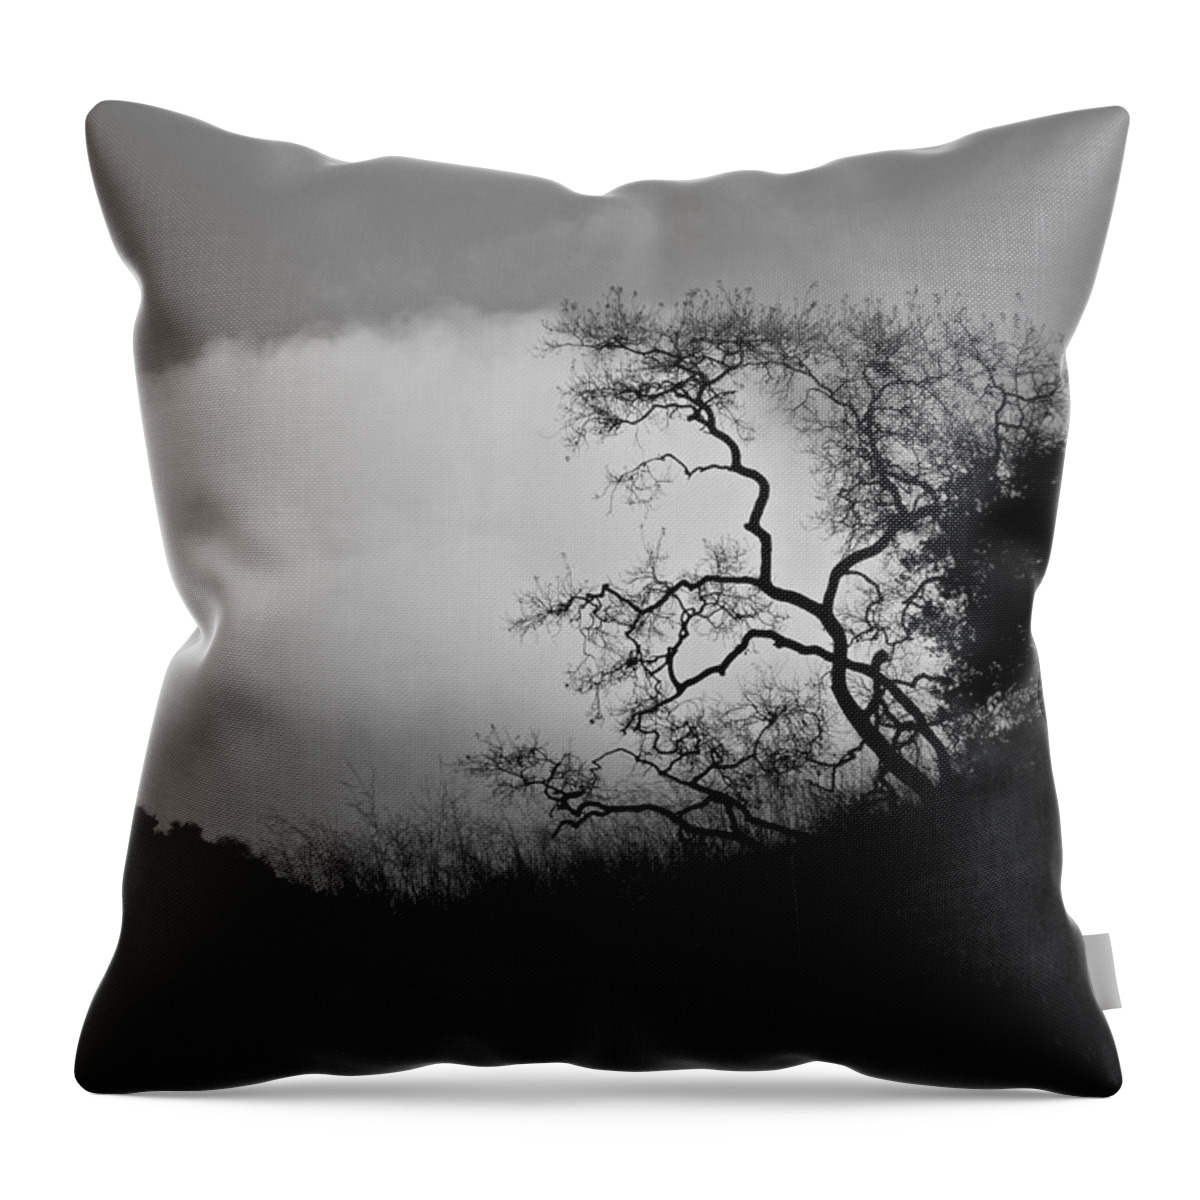 Mountains Throw Pillow featuring the photograph Morning Hike by Diana Hatcher